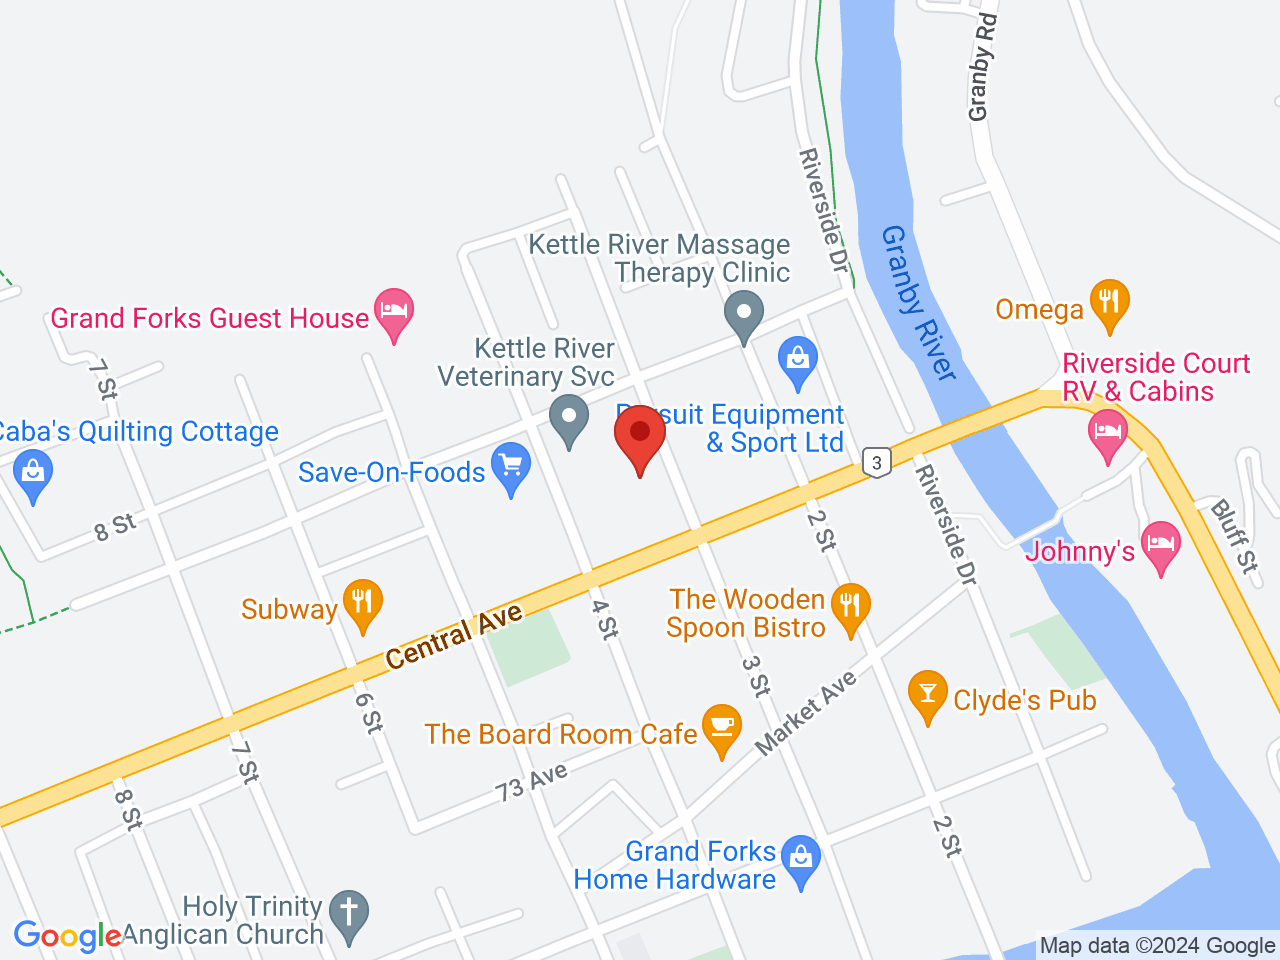 Street map for Grand Forks BC Cannabis, 7439 3rd St., Grand Forks BC